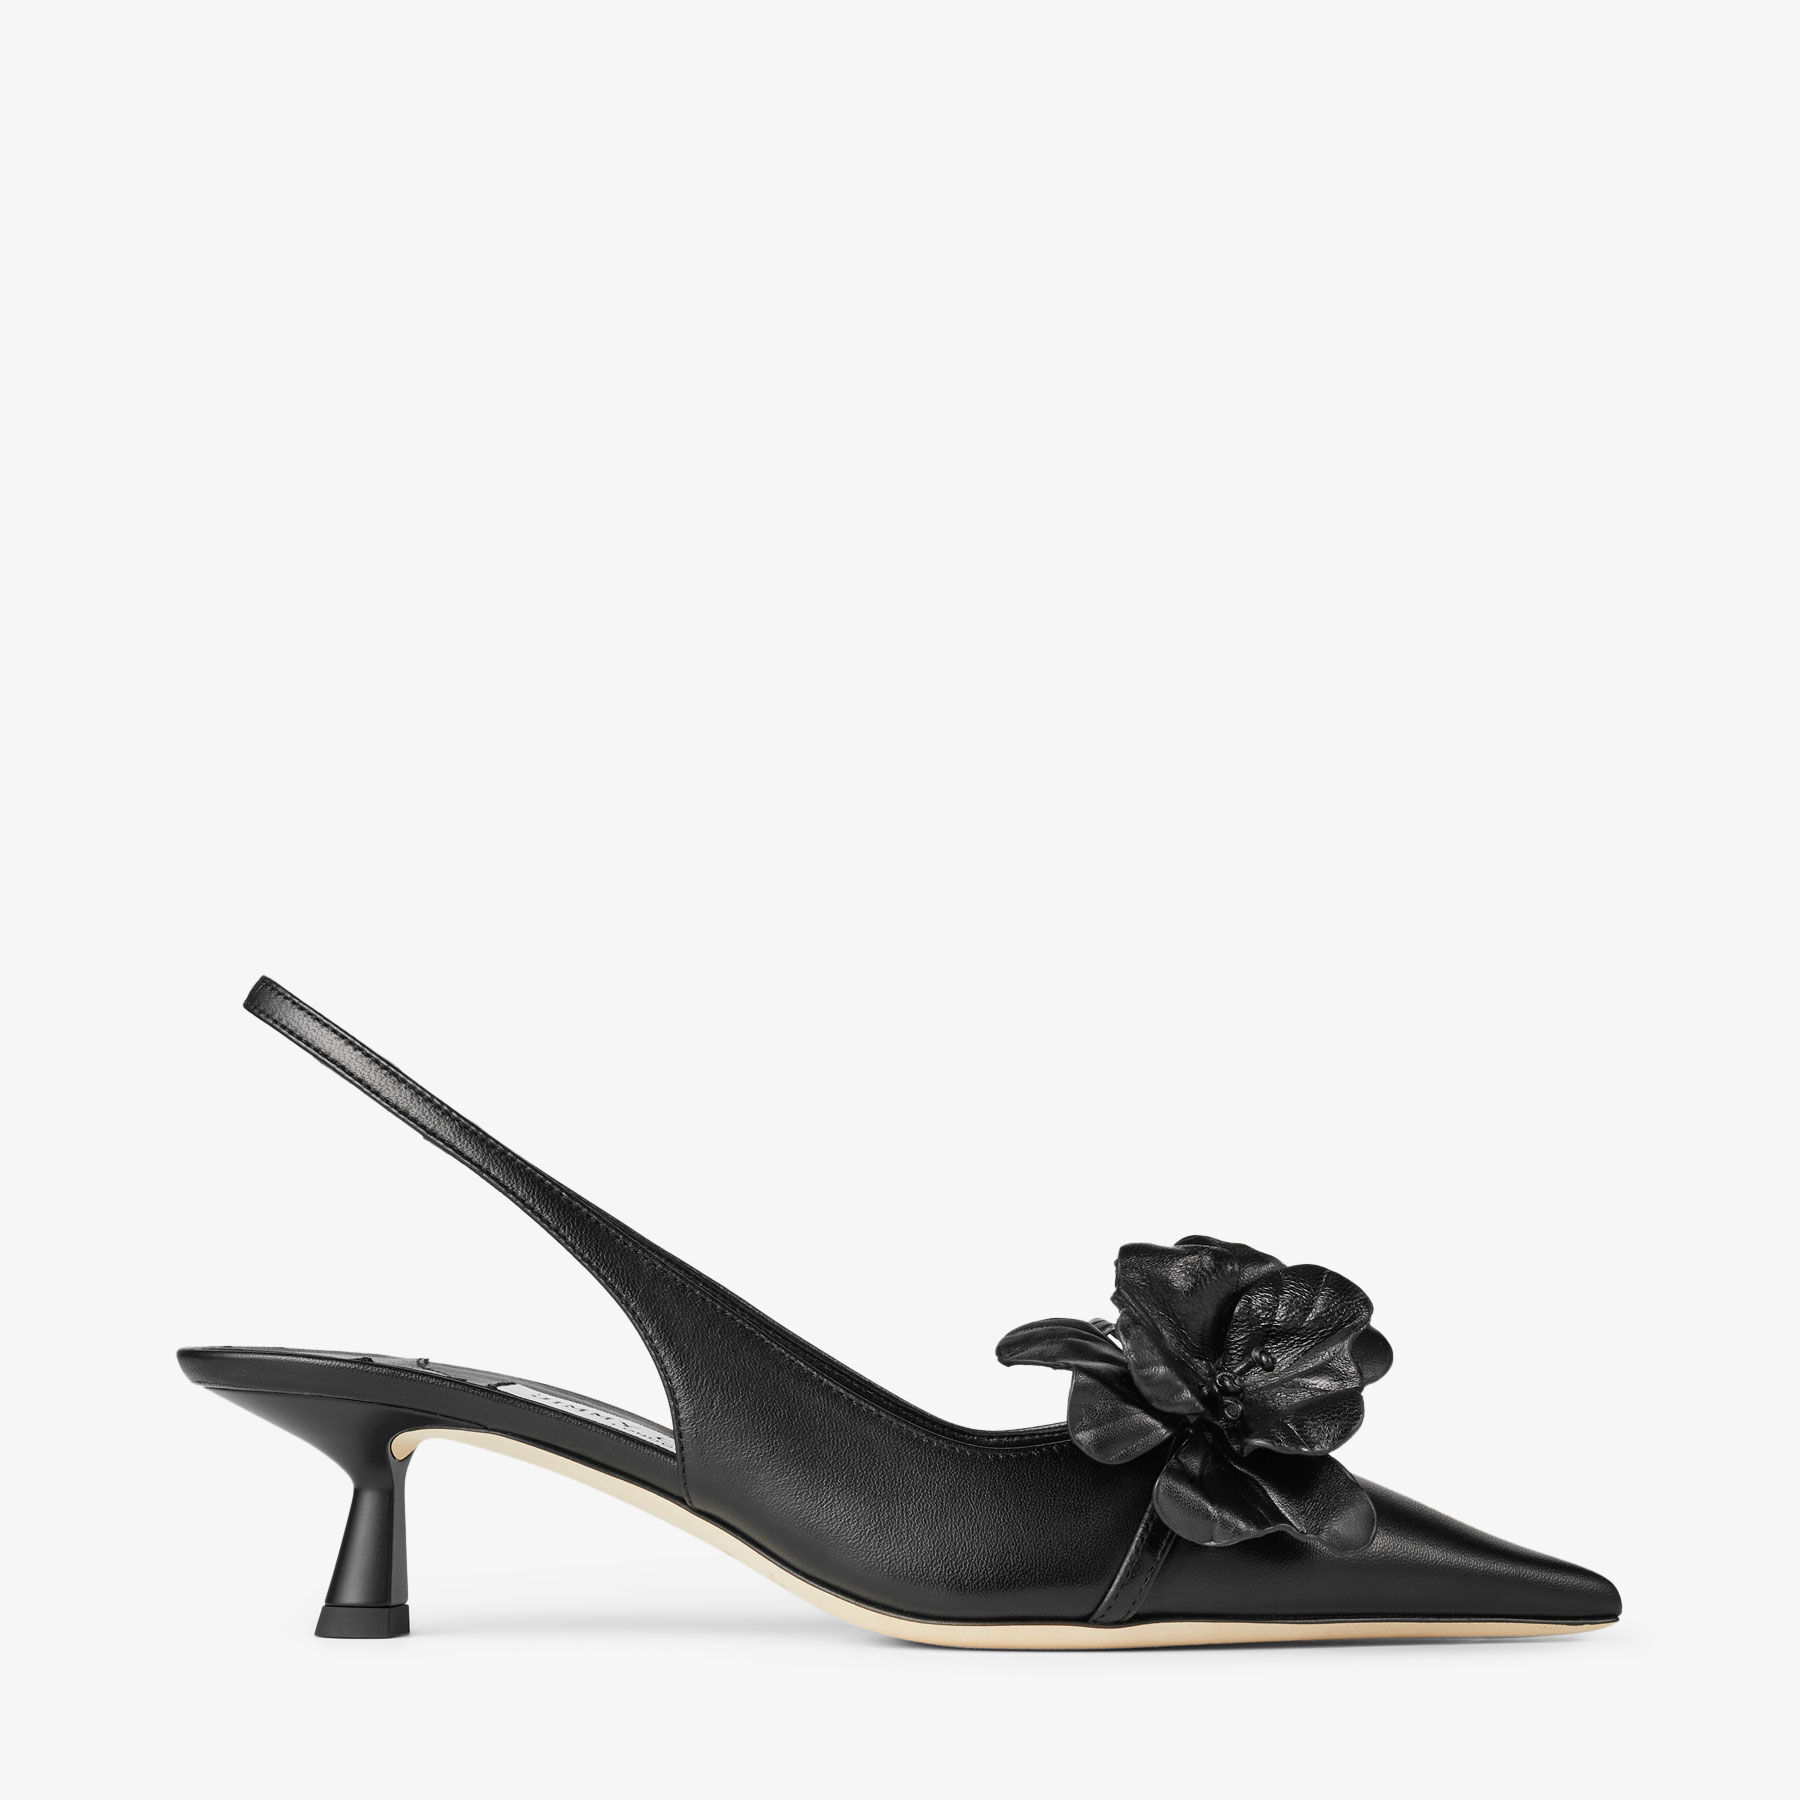 AMITA/FLOWERS 45 | Black Nappa Leather Sling Back Pumps with Flowers ...